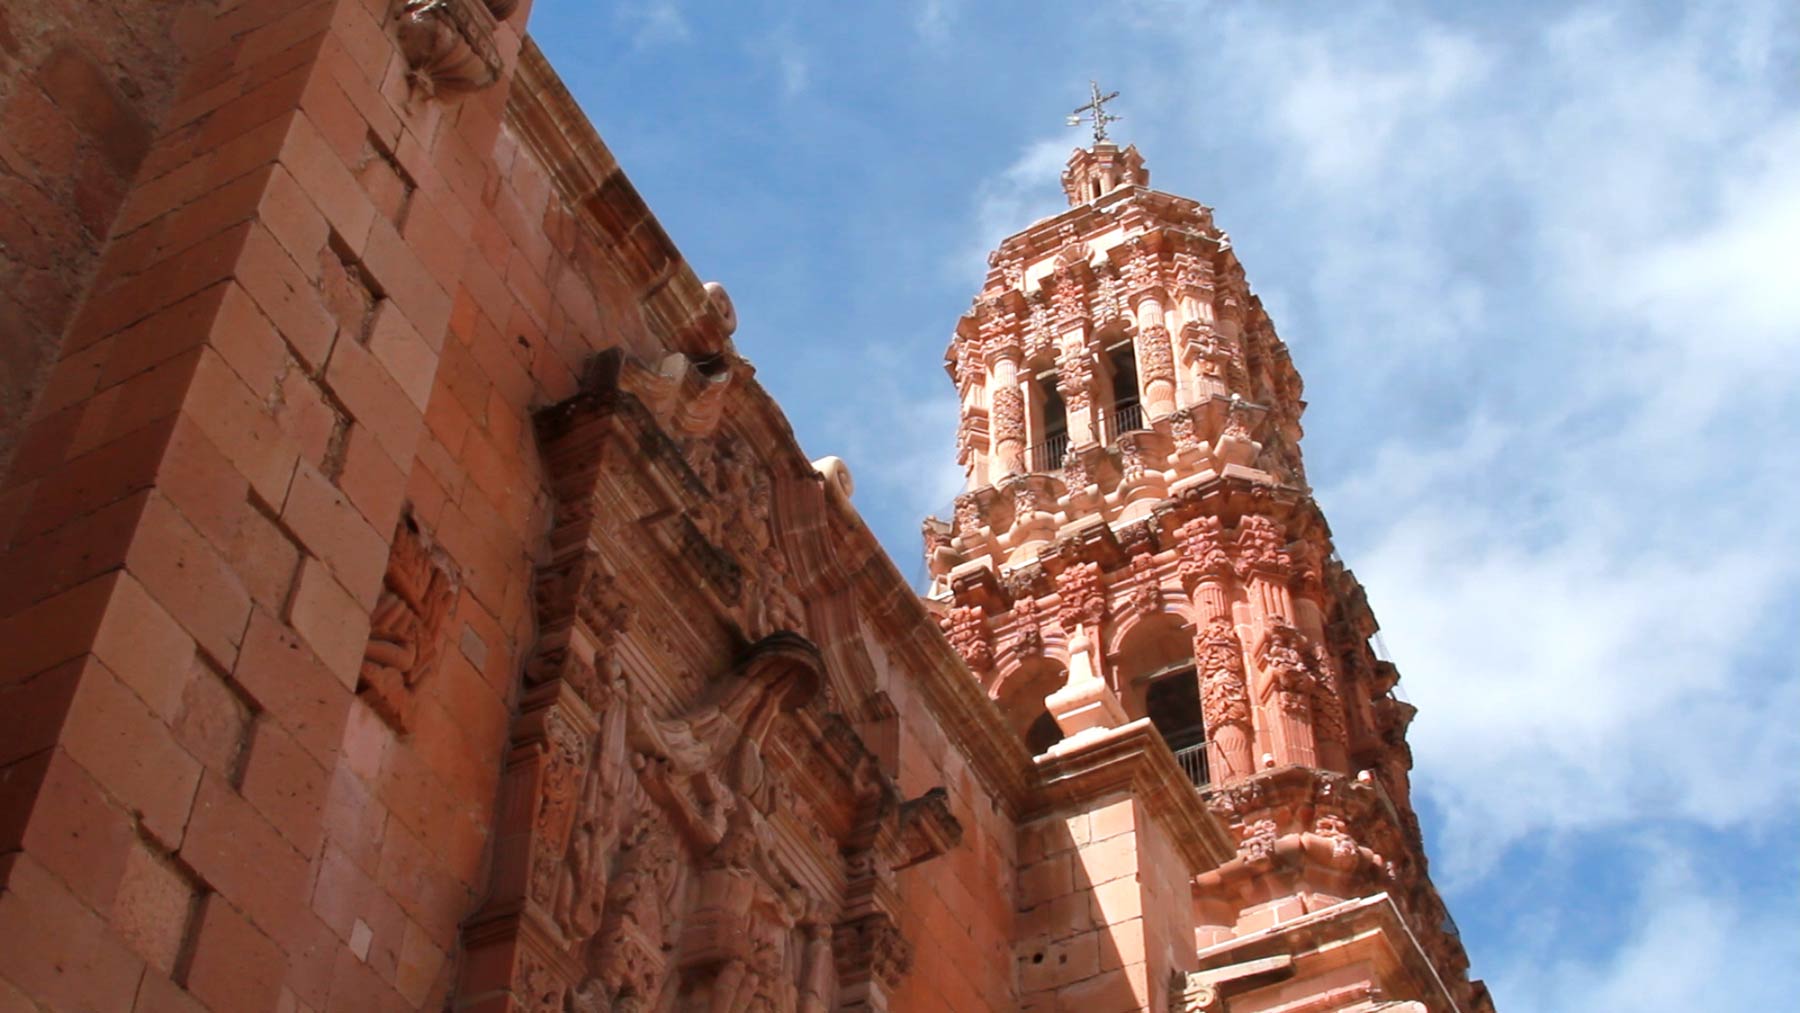 Photo. The Cathedral of Our Lady of the Assumption of Zacatecas was elevated to a basilica in 1959 by Pope John XXIII